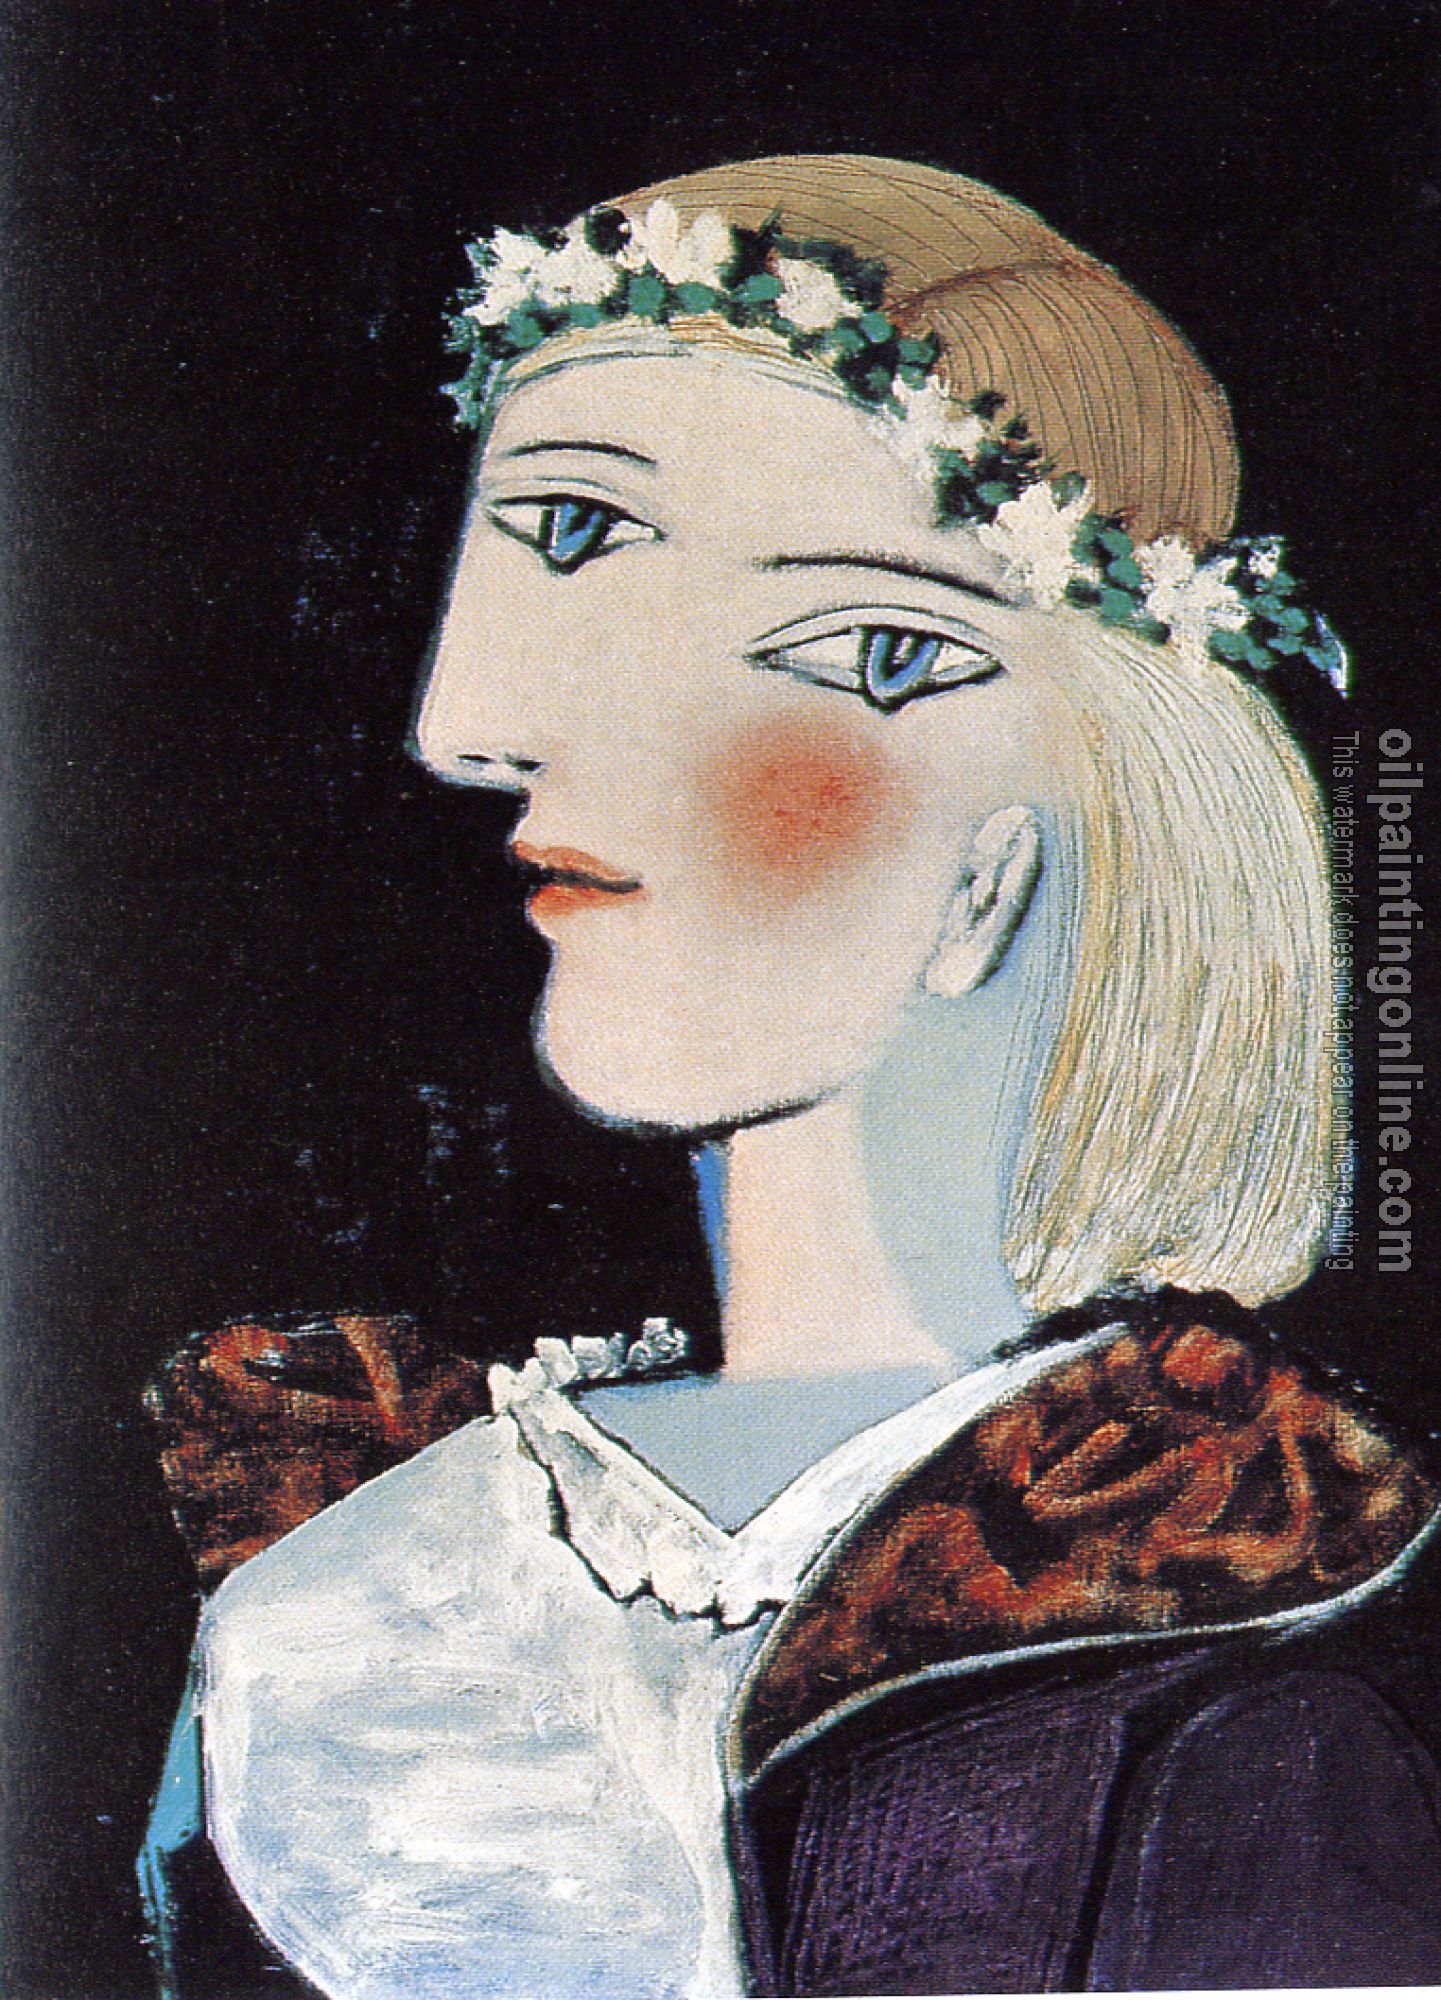 Picasso, Pablo - marie-therese with a garland